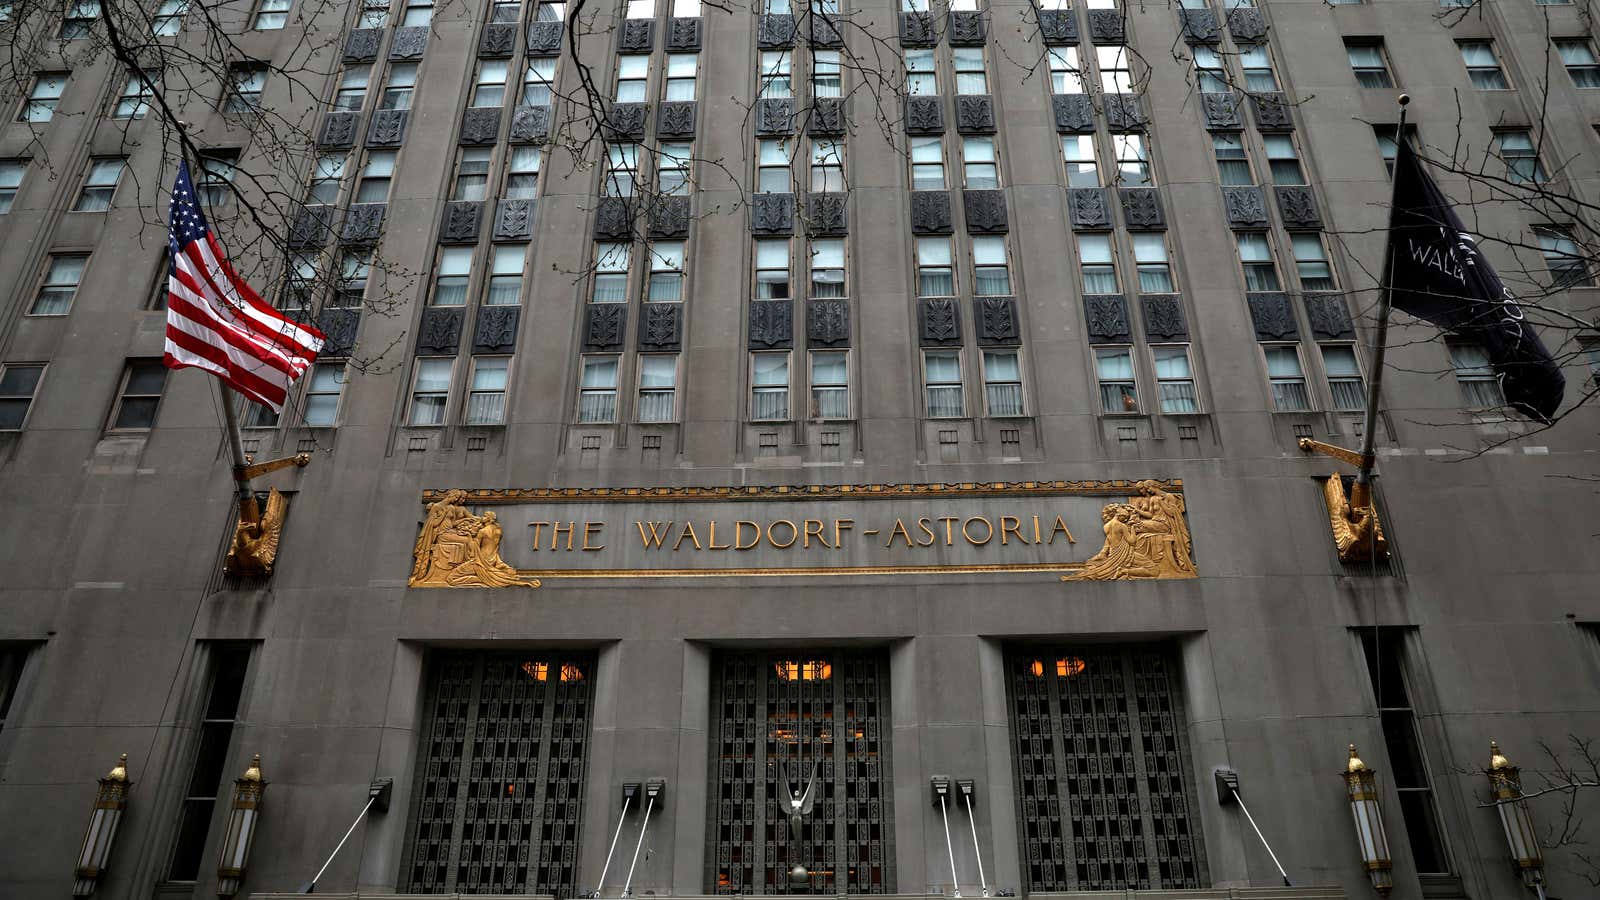 An exterior view of the world famous Waldorf Astoria Hotel in midtown Manhattan in New York City